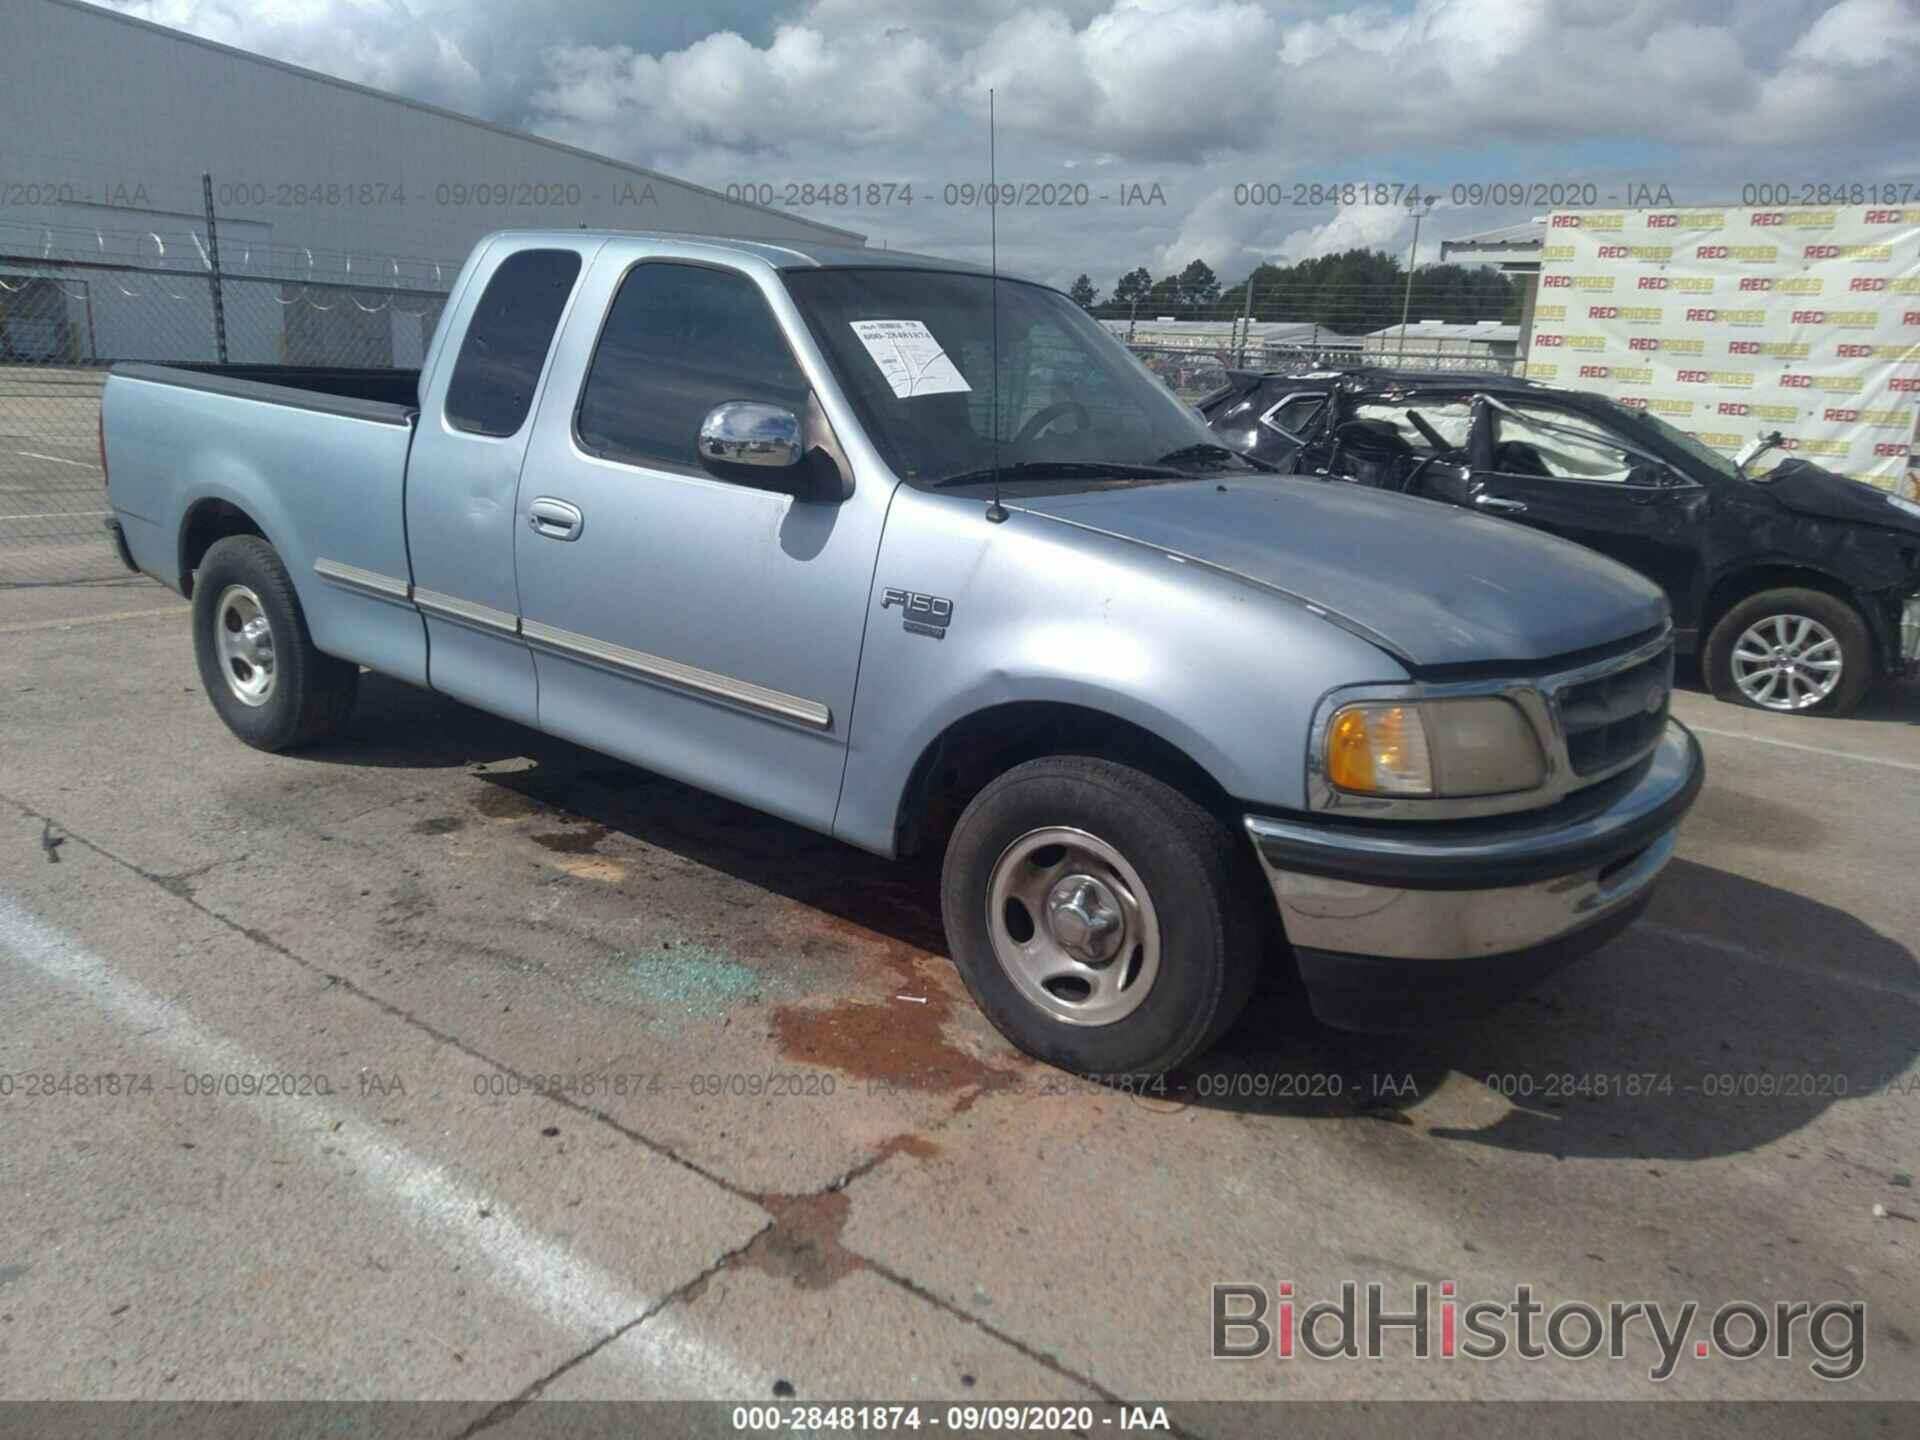 Photo 1FTZX176XWNA56316 - FORD F-150 1998